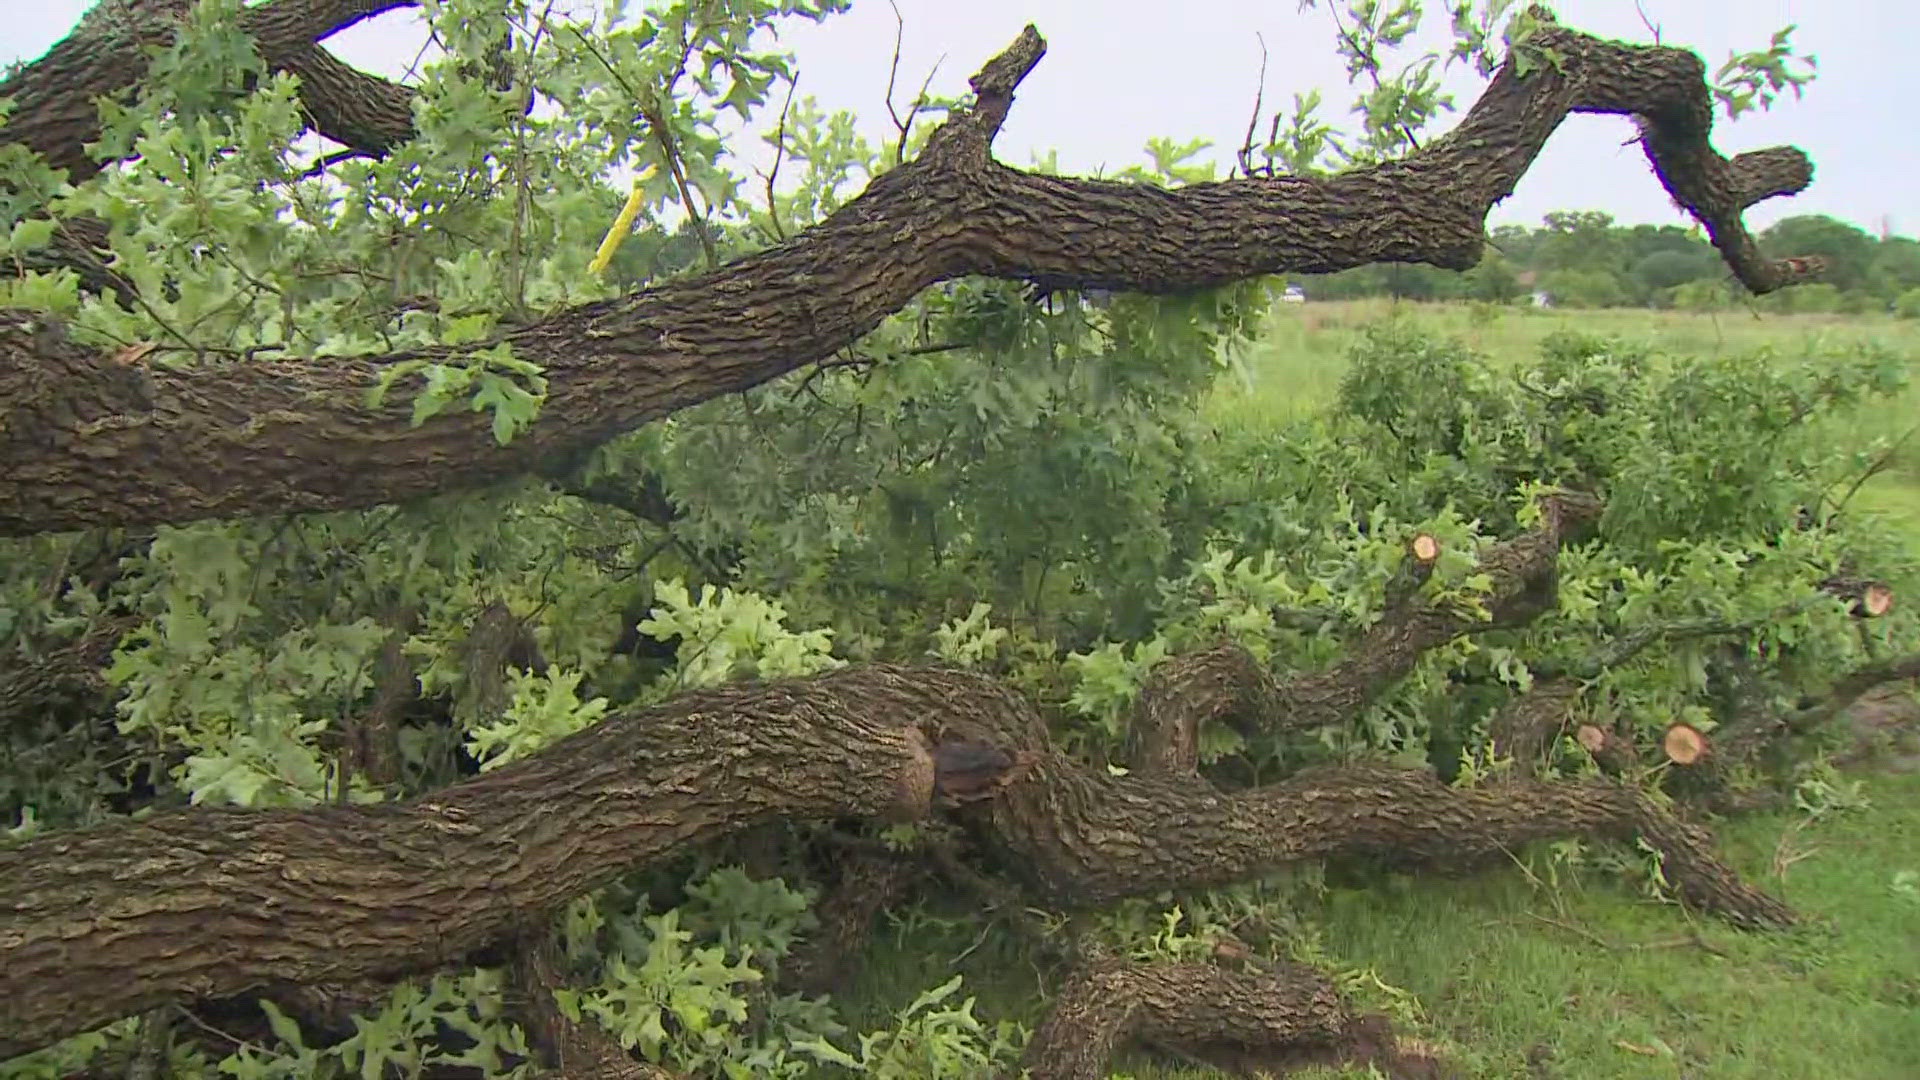 No injuries have been reported, but there have been reports of damage and uprooted trees.